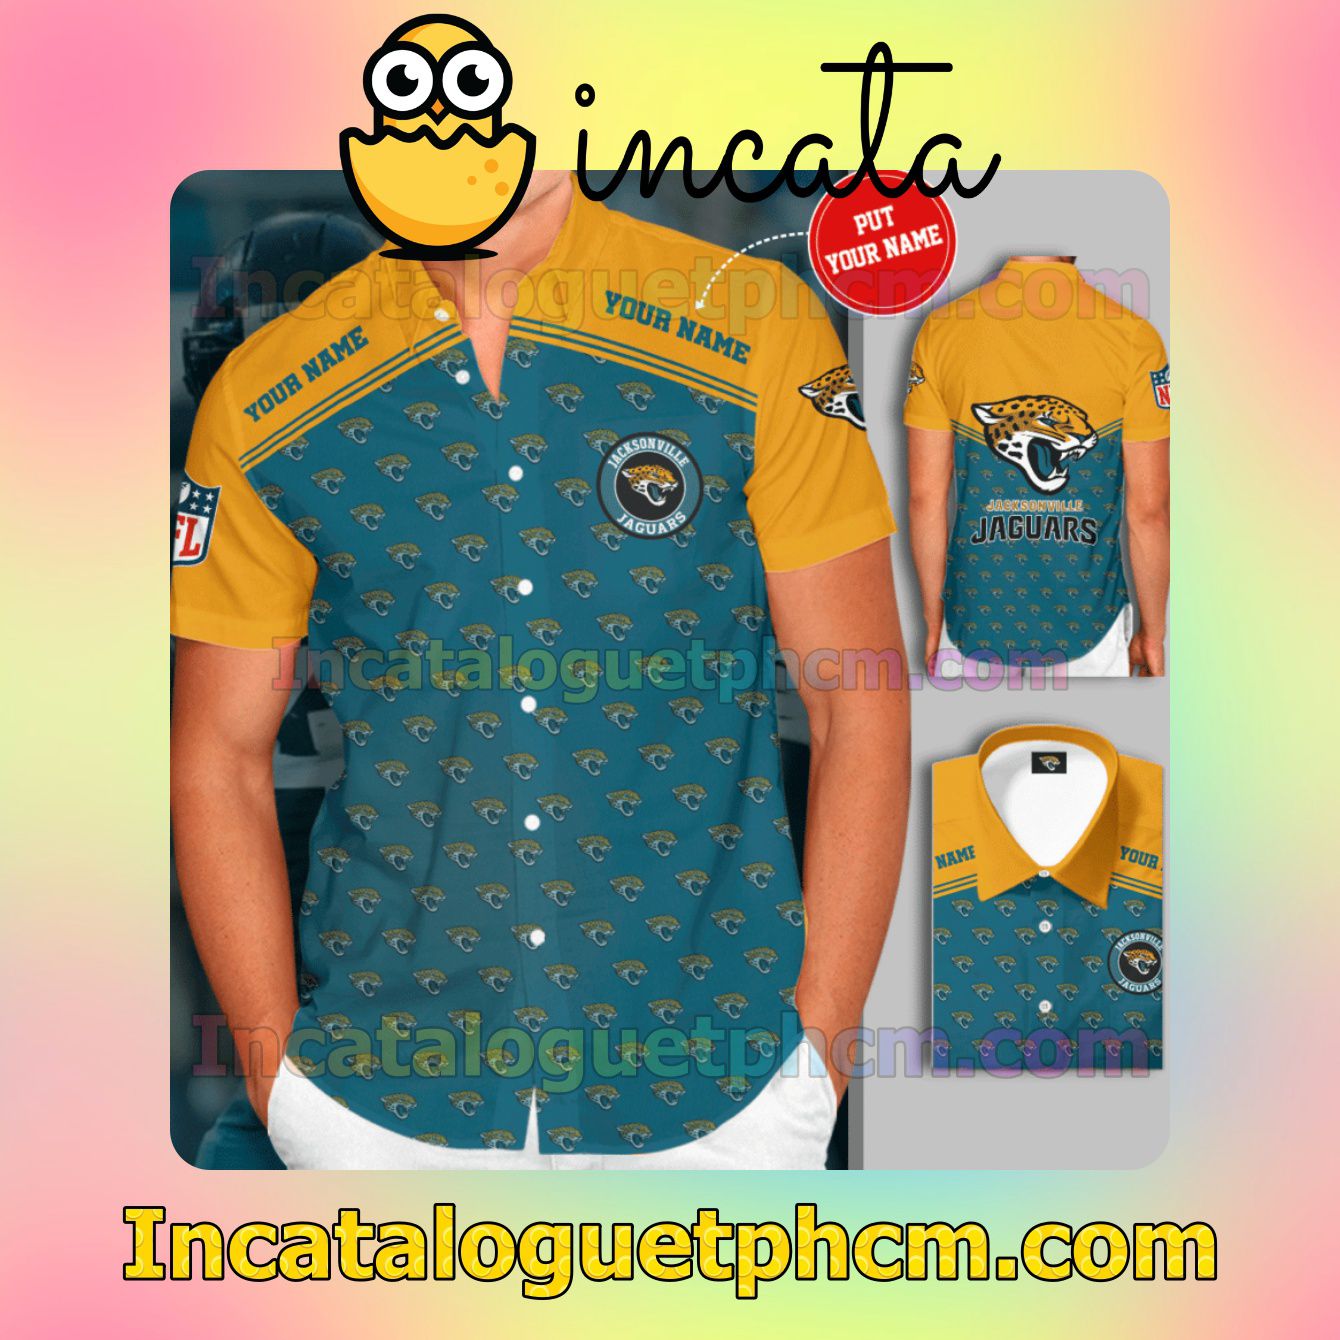 Personalized Jacksonville Jaguars Logo Teal Yellow Button Shirt And Swim Trunk